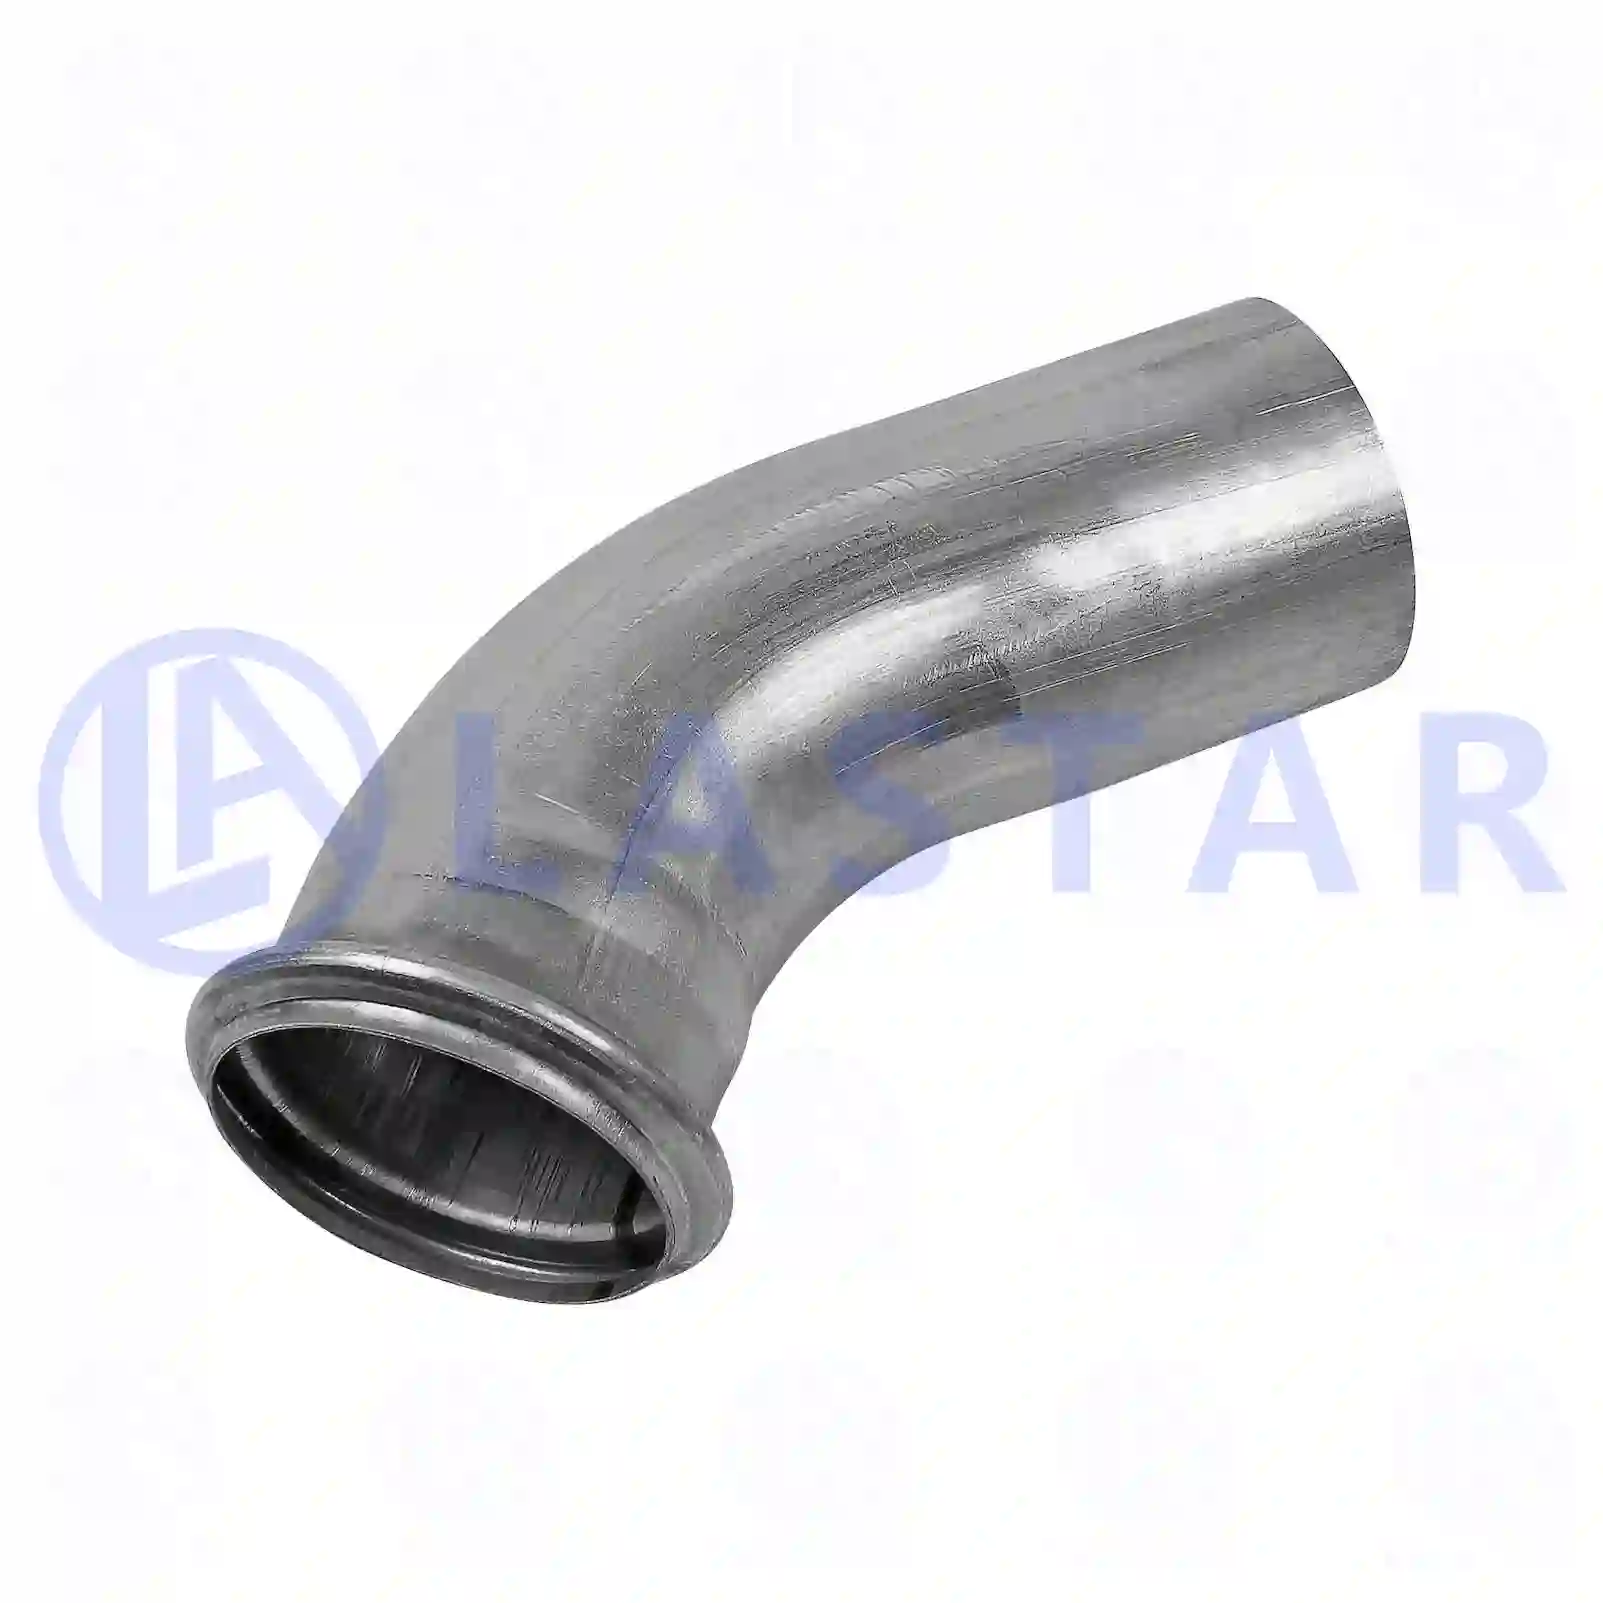 Exhaust pipe, 77706900, 7420409099, 20409 ||  77706900 Lastar Spare Part | Truck Spare Parts, Auotomotive Spare Parts Exhaust pipe, 77706900, 7420409099, 20409 ||  77706900 Lastar Spare Part | Truck Spare Parts, Auotomotive Spare Parts